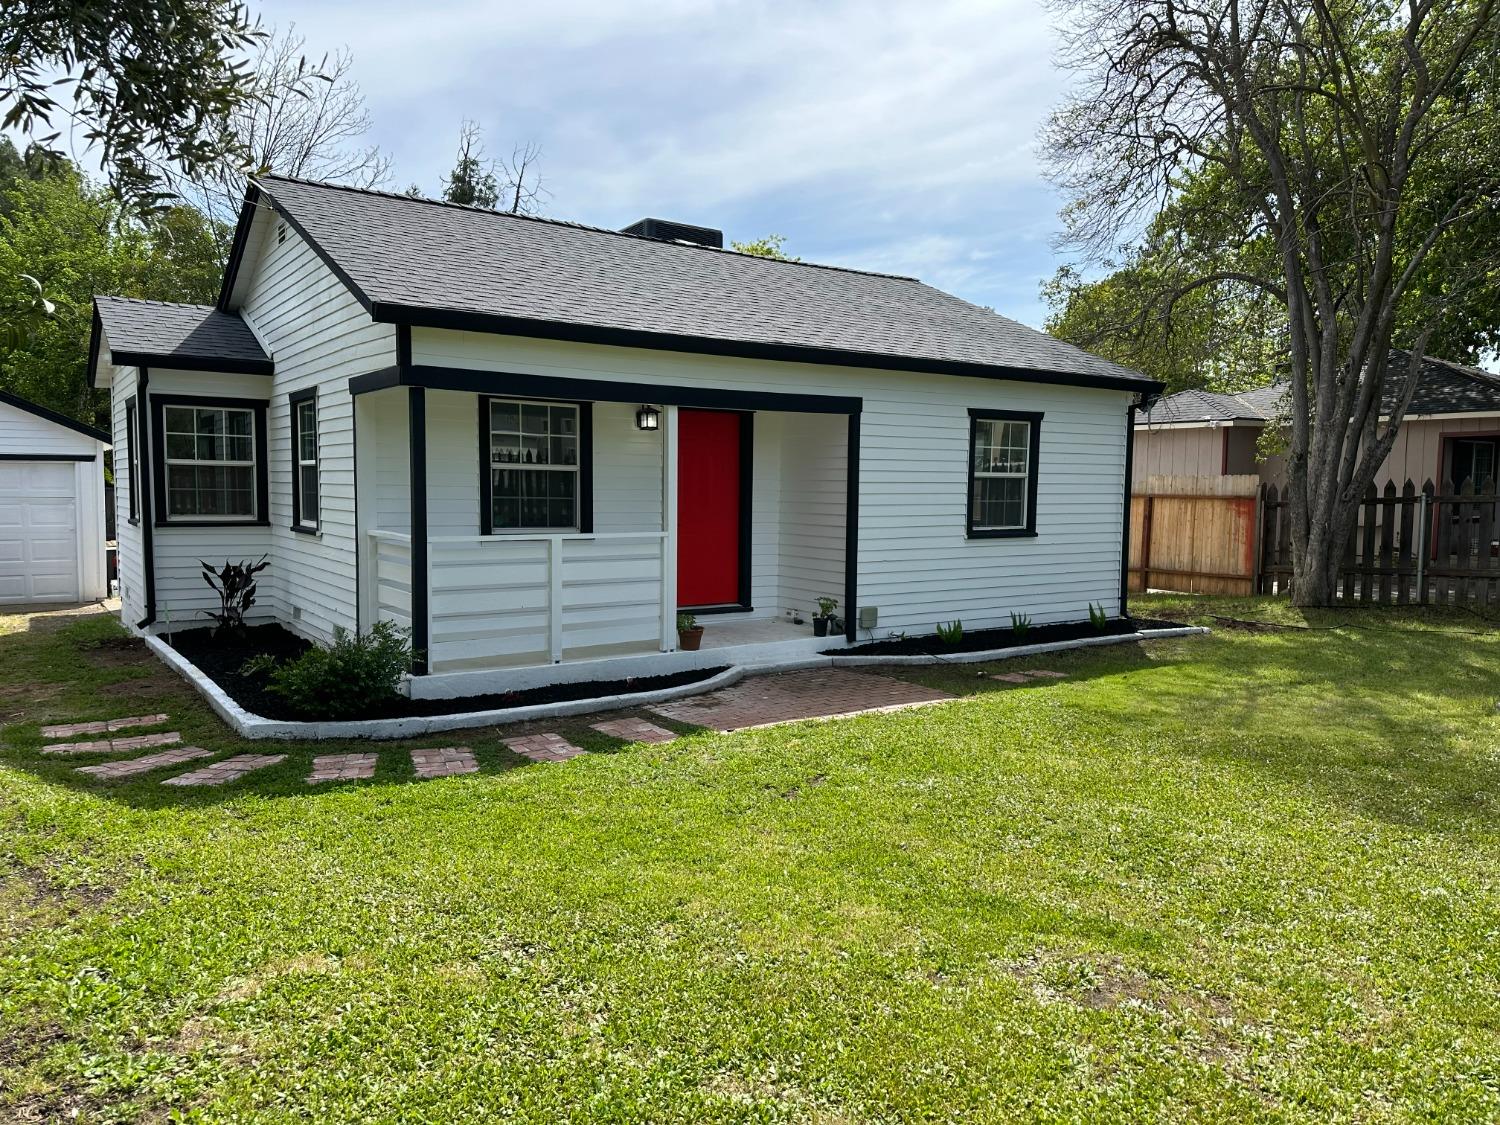 PERFECT 1st time home buyer opportunity. Completely remodeled bungalow ready for a new owner. Roof i